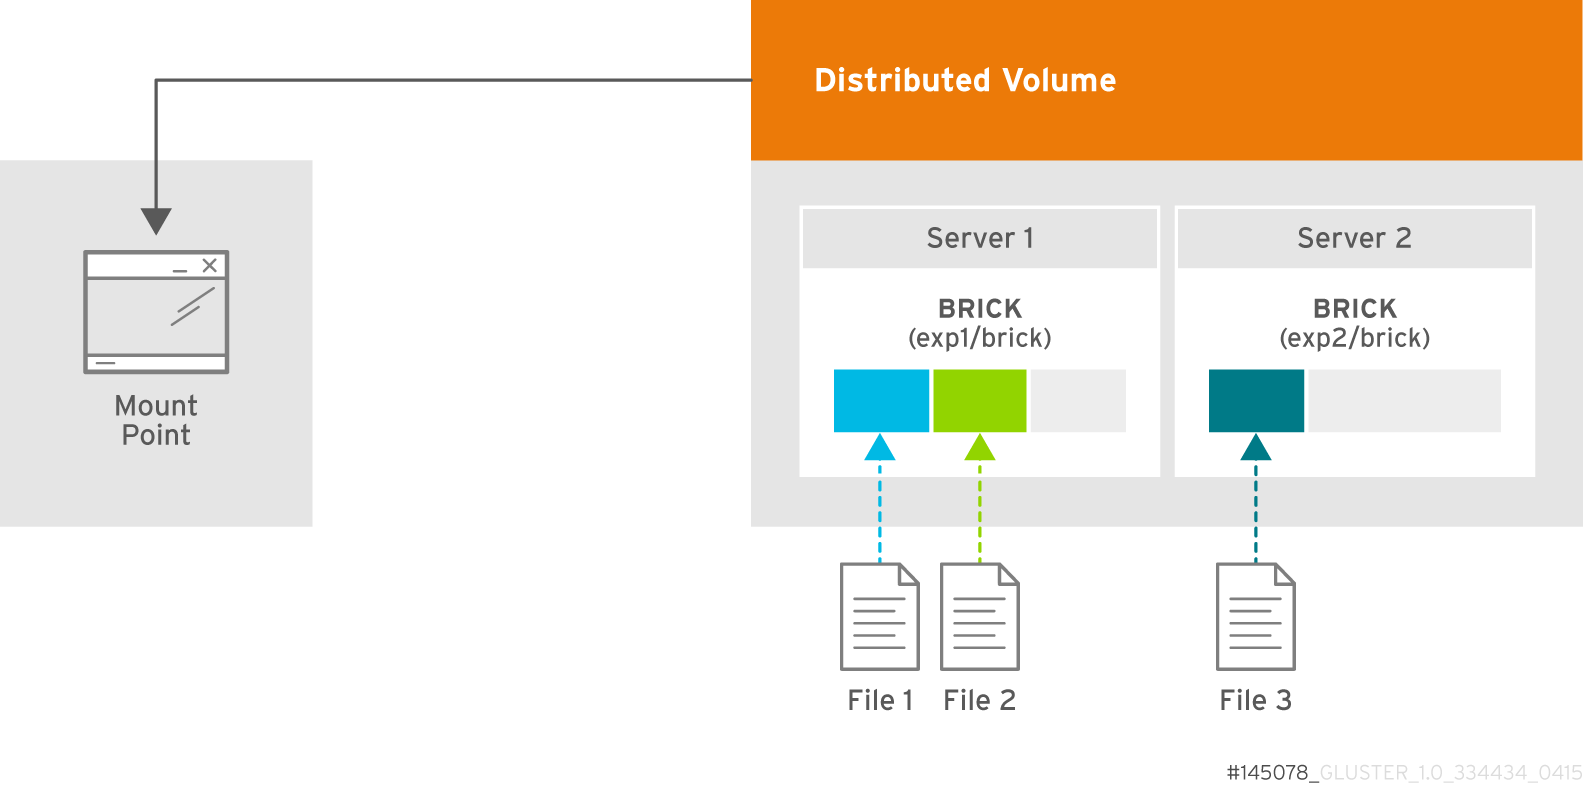 Illustration of a distributed volume consisting of two servers. Two files are shown on the server1 brick, and one file is shown on the server2 brick. The distributed volume is set to a single mount point.